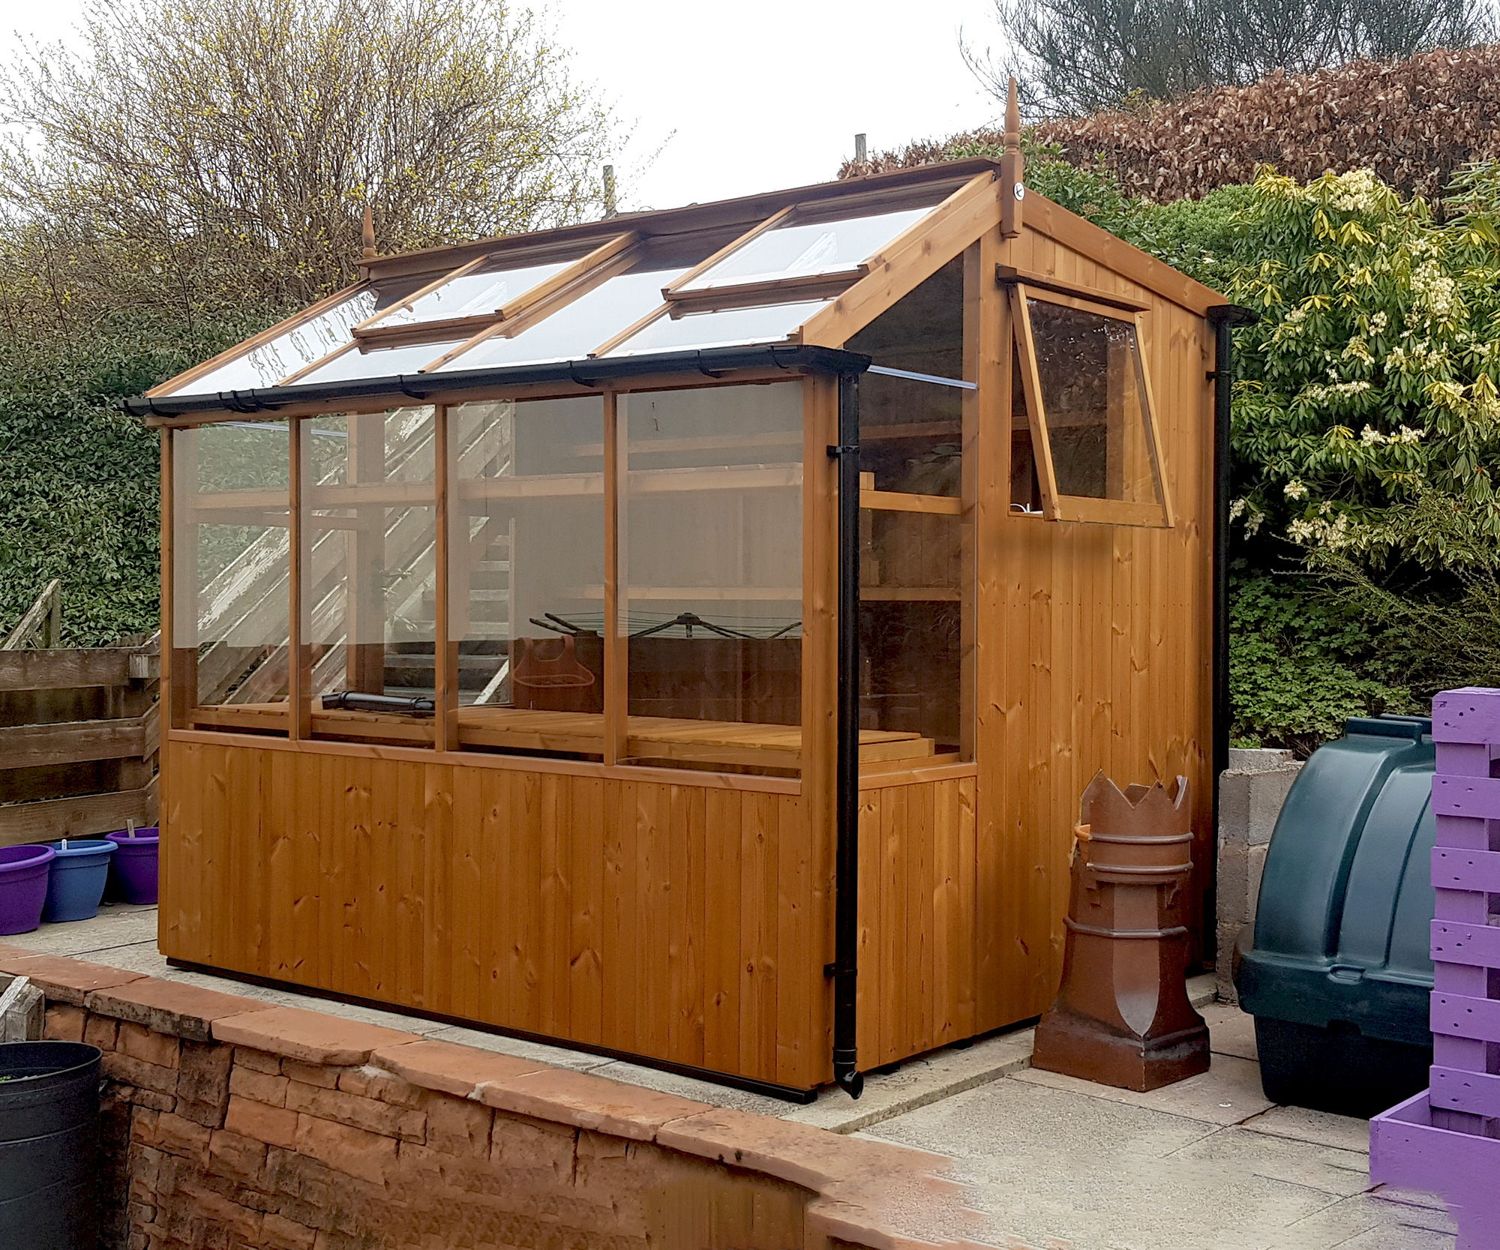 Swallow Jay 6x10 Wooden Potting Shed Greenhouse Stores